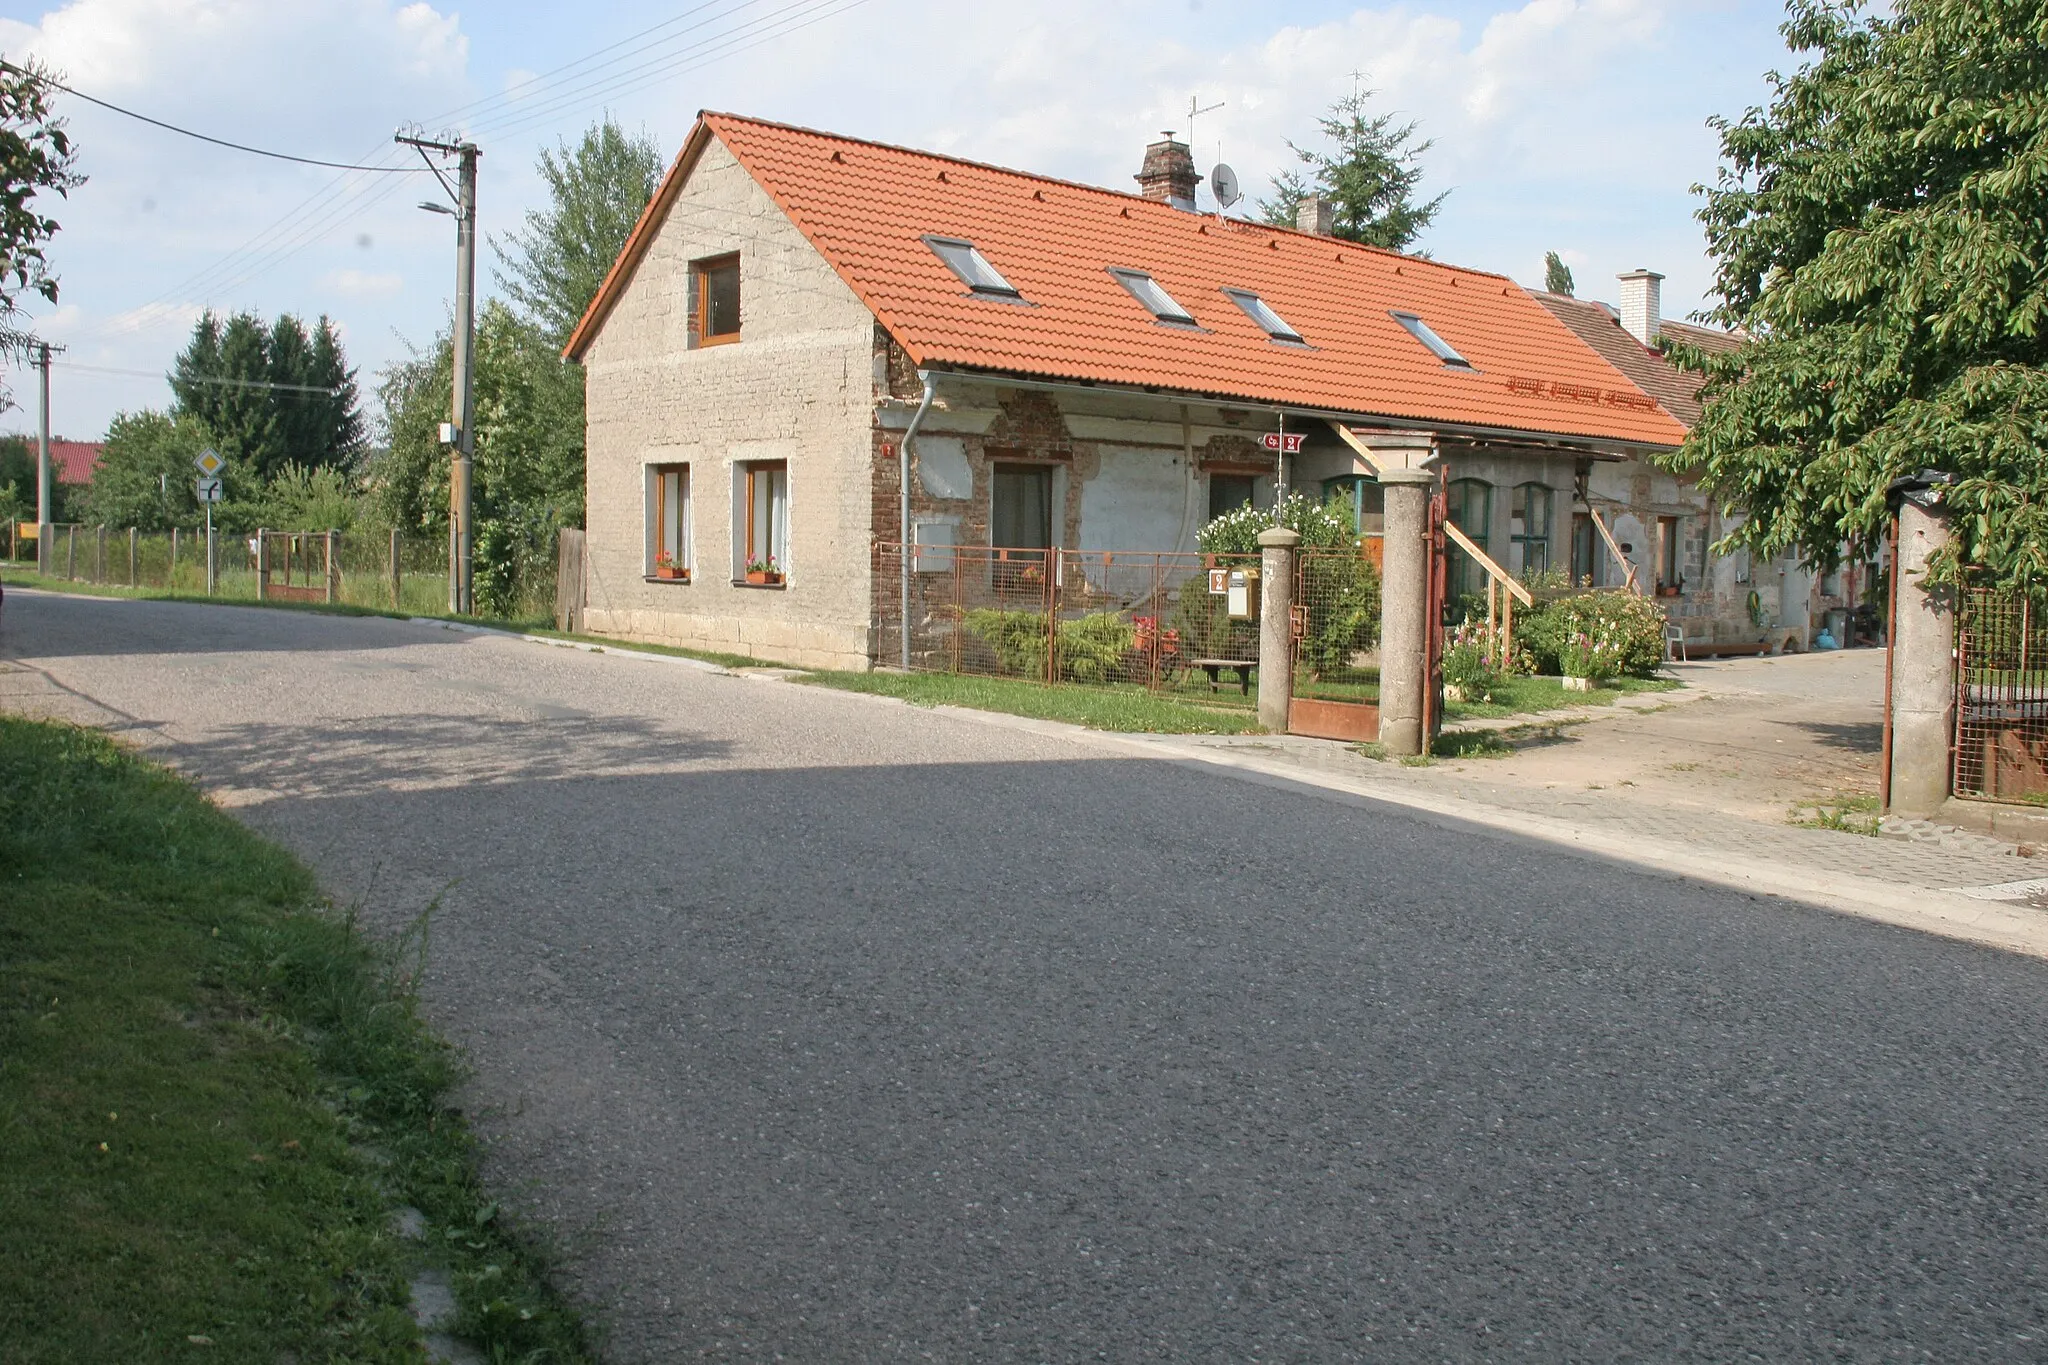 Photo showing: Rtyně čp. 2
Camera location 50° 21′ 45.9″ N, 15° 52′ 16.59″ E View this and other nearby images on: OpenStreetMap 50.362749;   15.871274

This file was created as a part of the photographic program of Wikimedia Czech Republic. Project: Foto českých obcí The program supports Wikimedia Commons photographers in the Czech Republic.